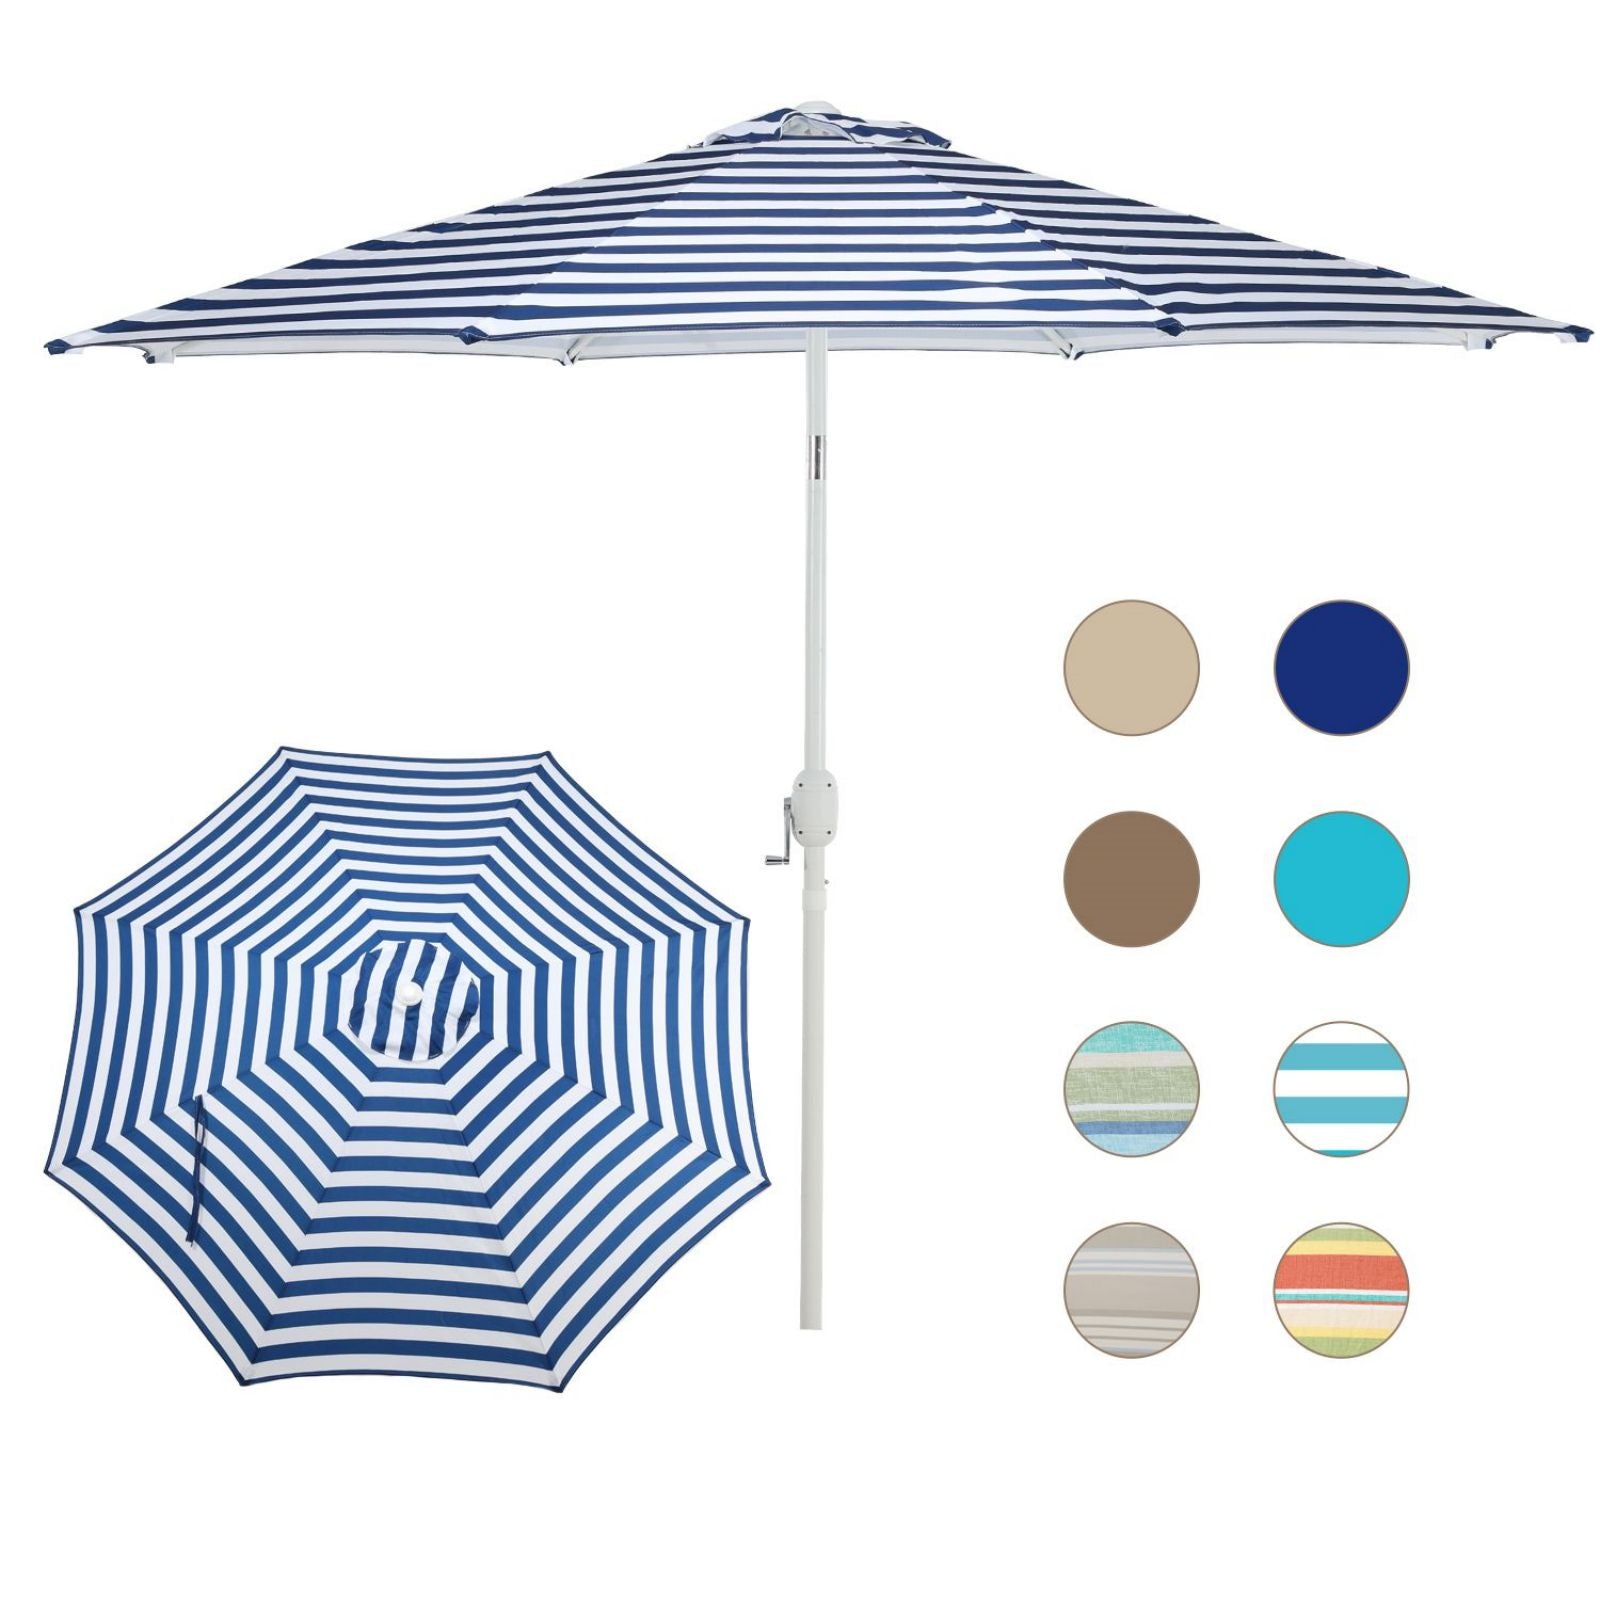 9FT Outdoor Patio Market Umbrella Aluminum Frame with Push Button Tilt Crank and 8 Steel Ribs, UV Protection  Aoodor  Dark Blue and White  